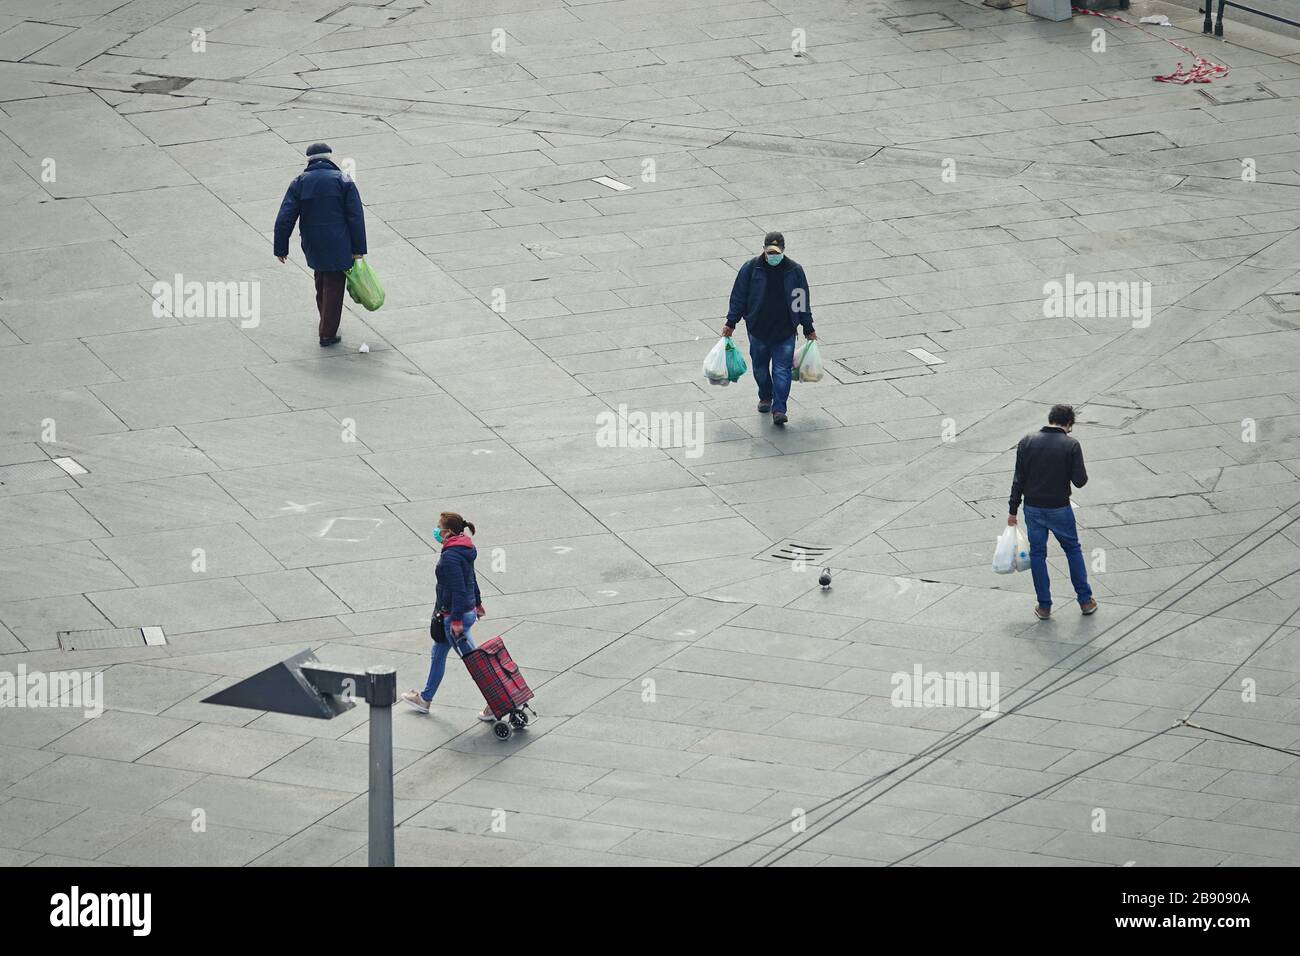 People back from shopping wearing masks to contain the spread of Coronavirus.  Milan, Italy - March 2020 Stock Photo